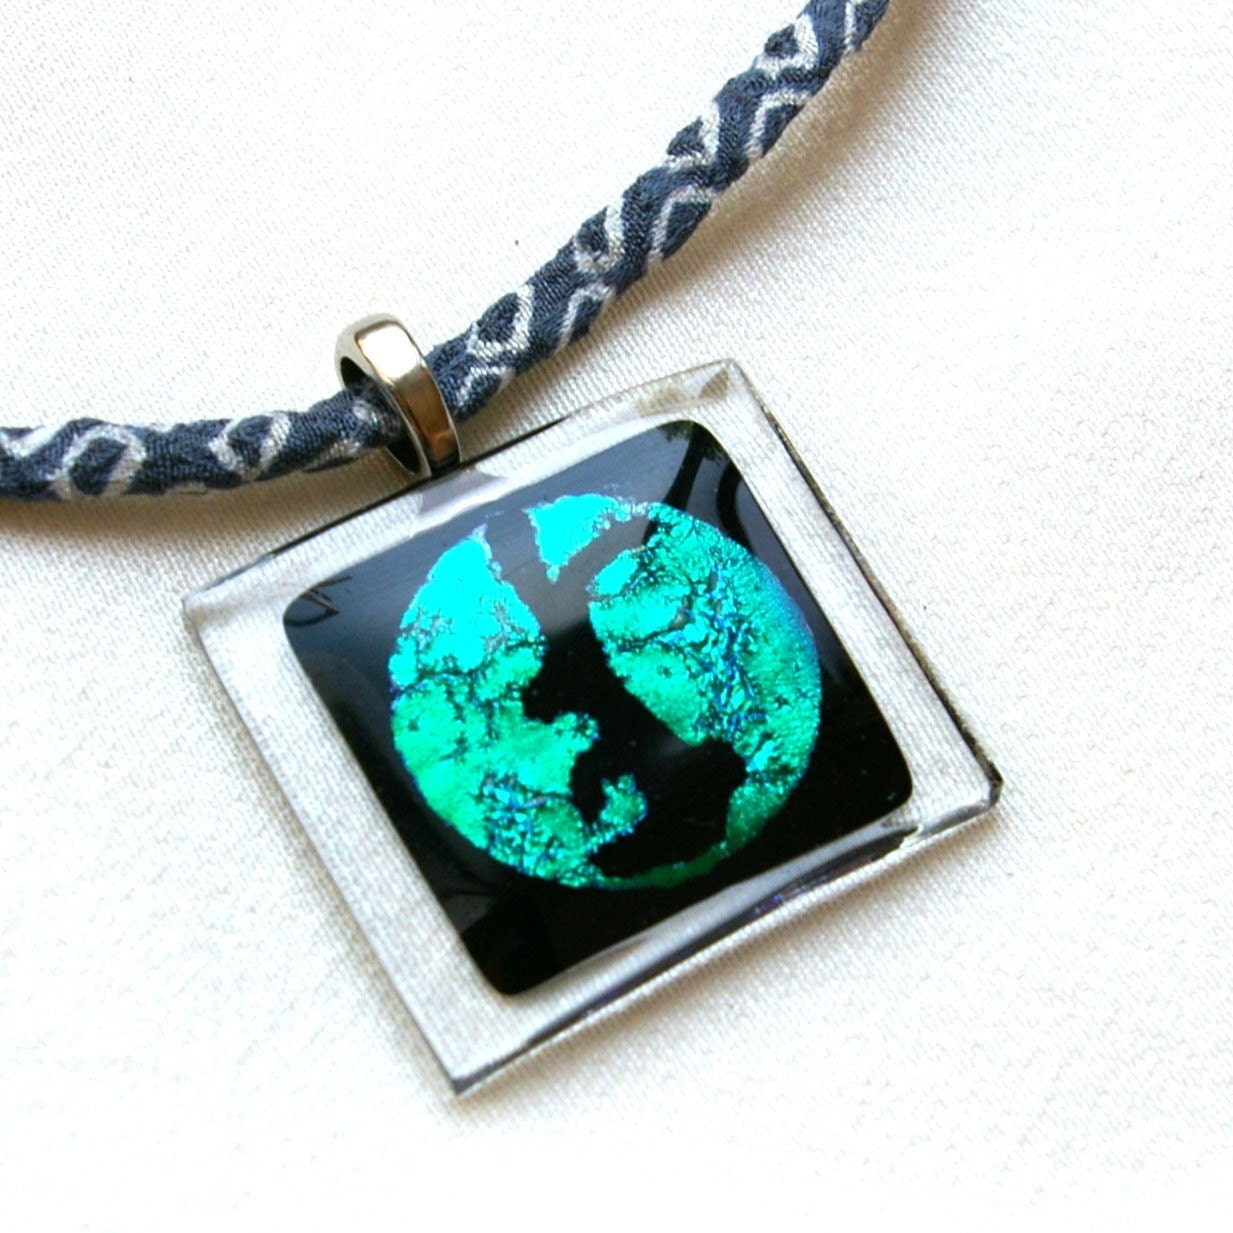 Dreaming Rabbit on the Moon-Fused Glass Pendant by AtelierKanawa